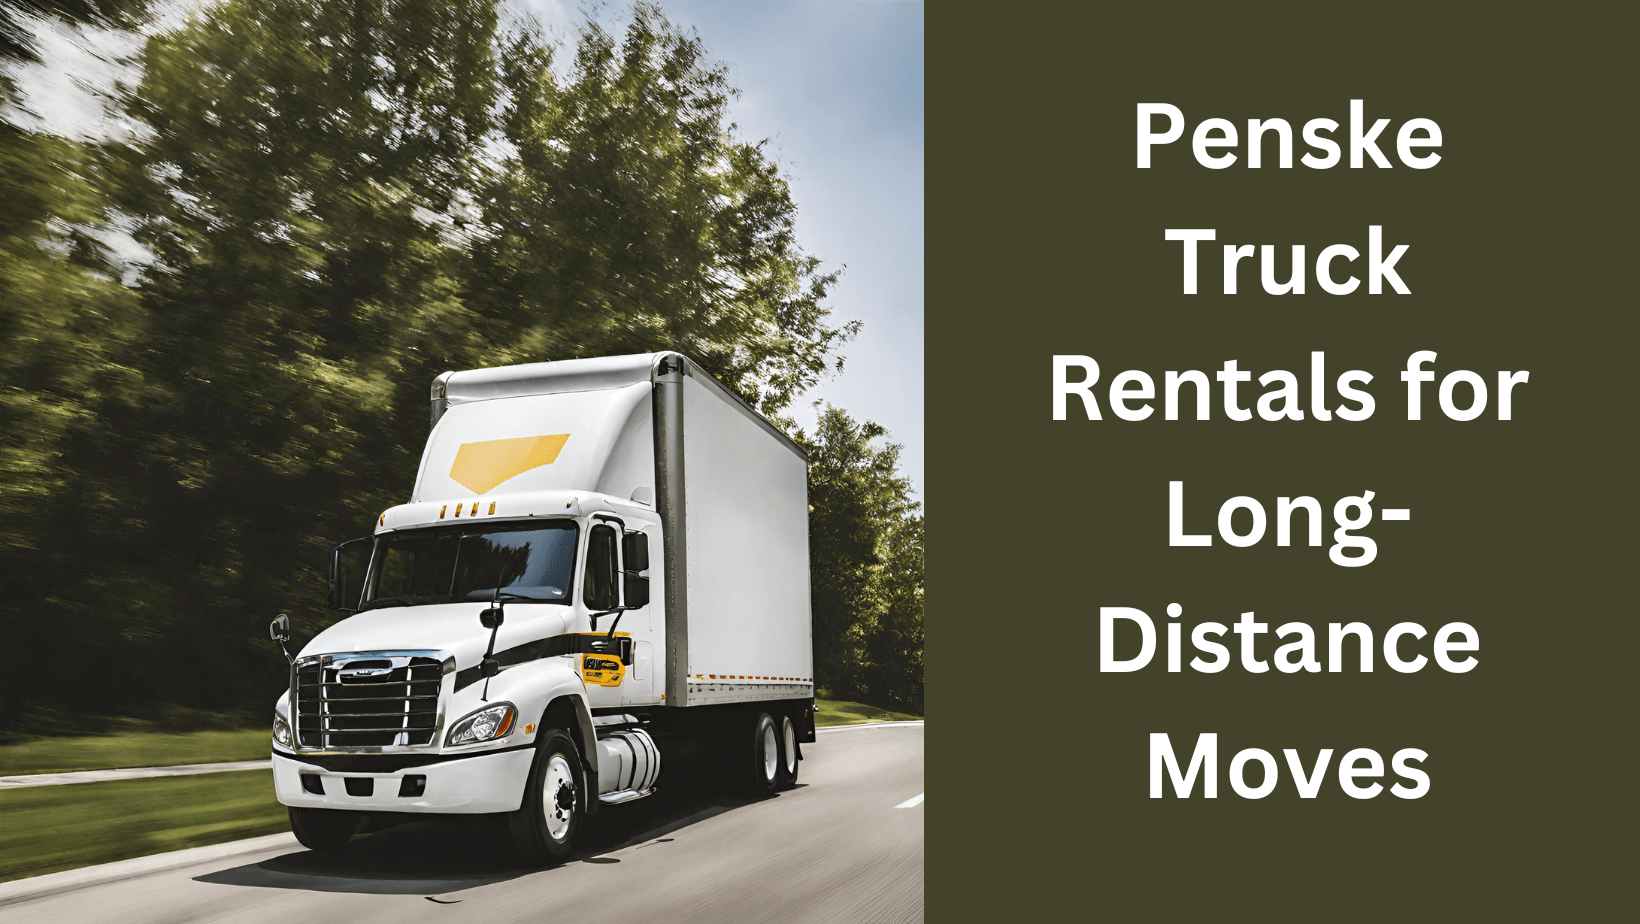 The Benefits of Using Penske Truck Rentals for Long-Distance Moves